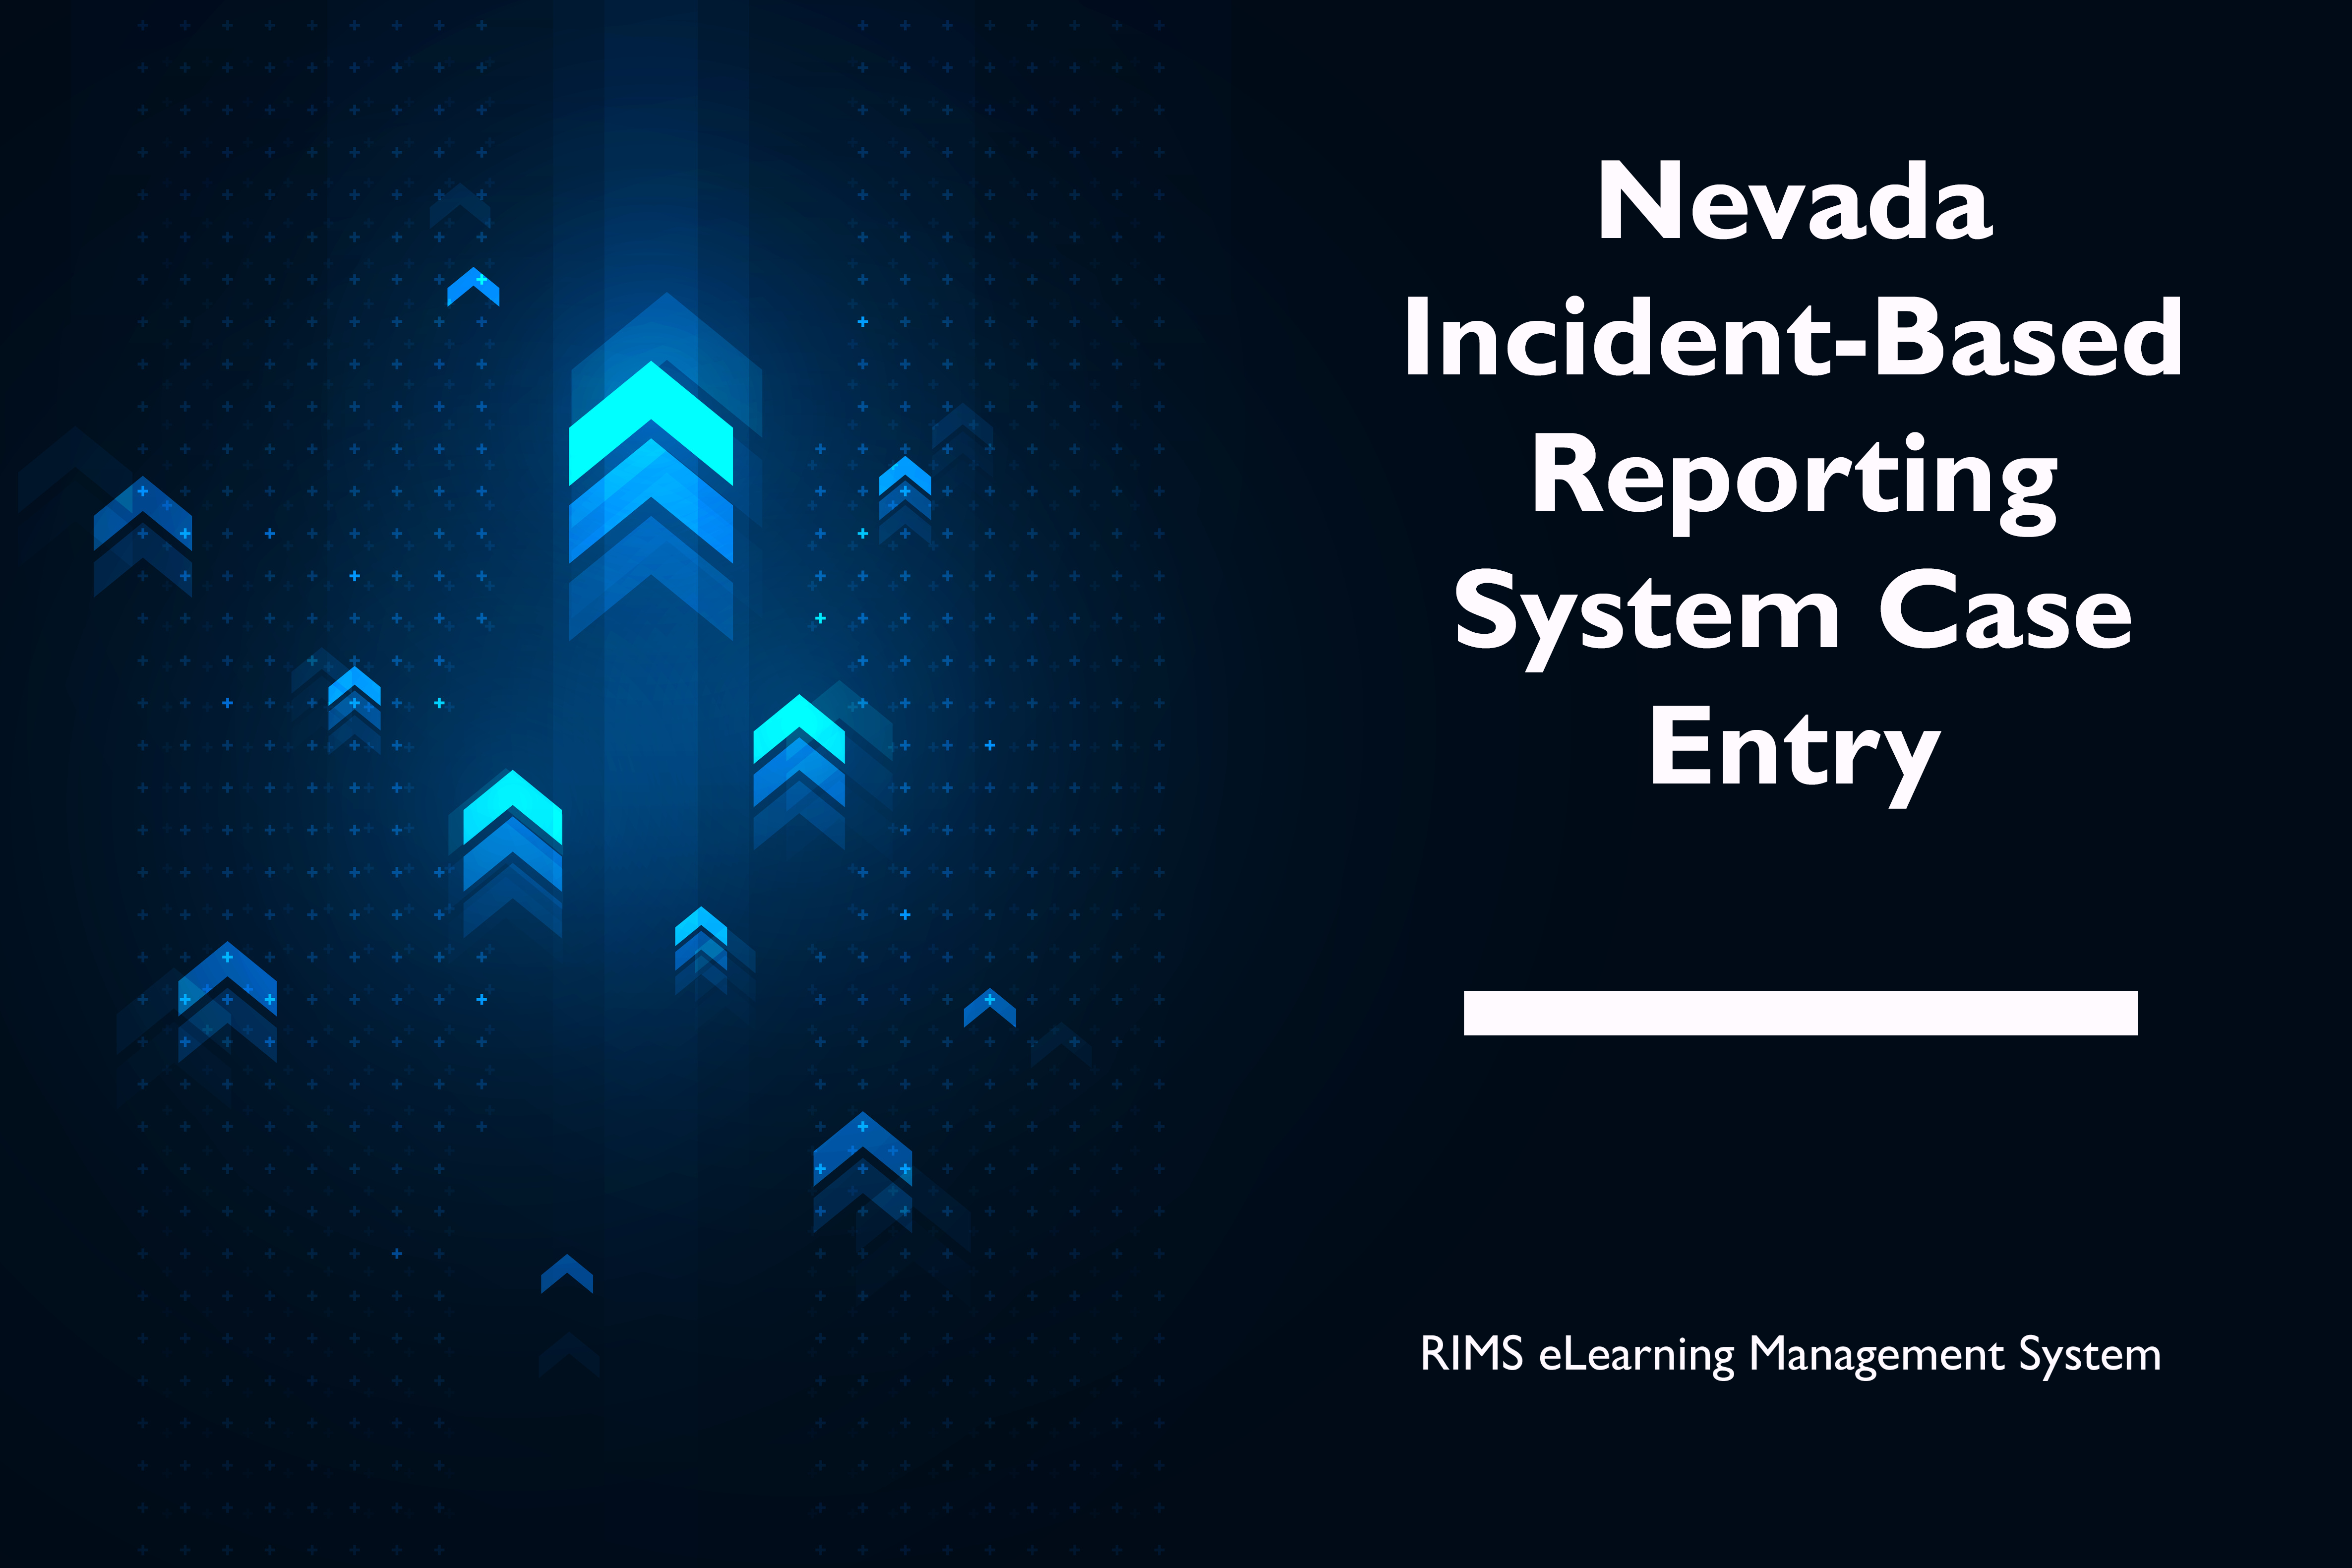 Nevada Incident-Based Reporting System (NIBRS) Entry